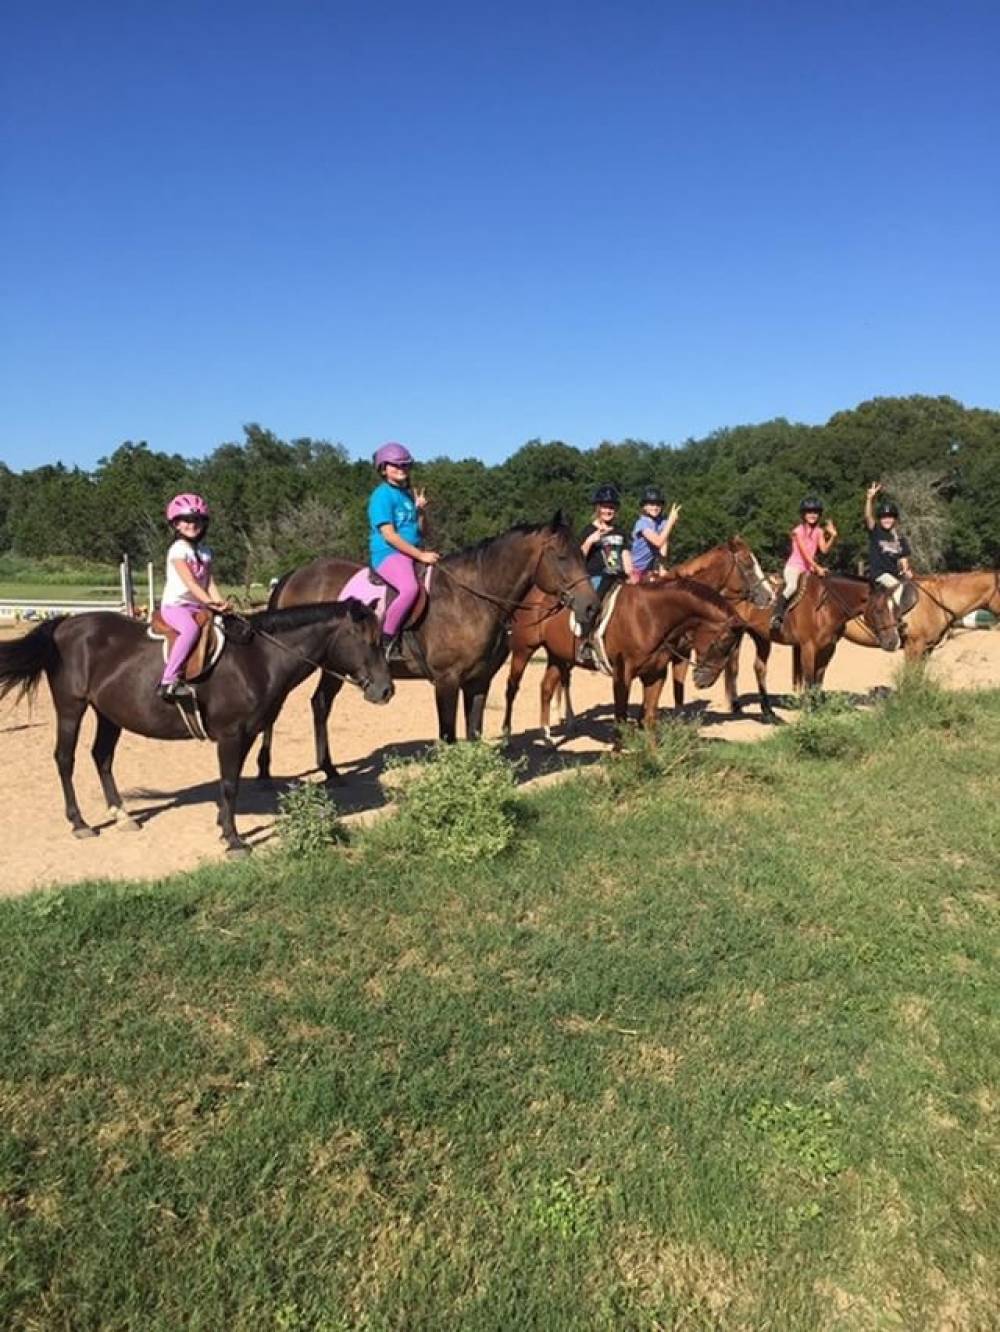 TOP TEXAS GIRLS CAMP: Hunters Chase Farms Inc. is a Top Girls Summer Camp located in Wimberley Texas offering many fun and enriching Girls and other camp programs. Hunters Chase Farms Inc. also offers CIT/LIT and/or Teen Leadership Opportunities, too.